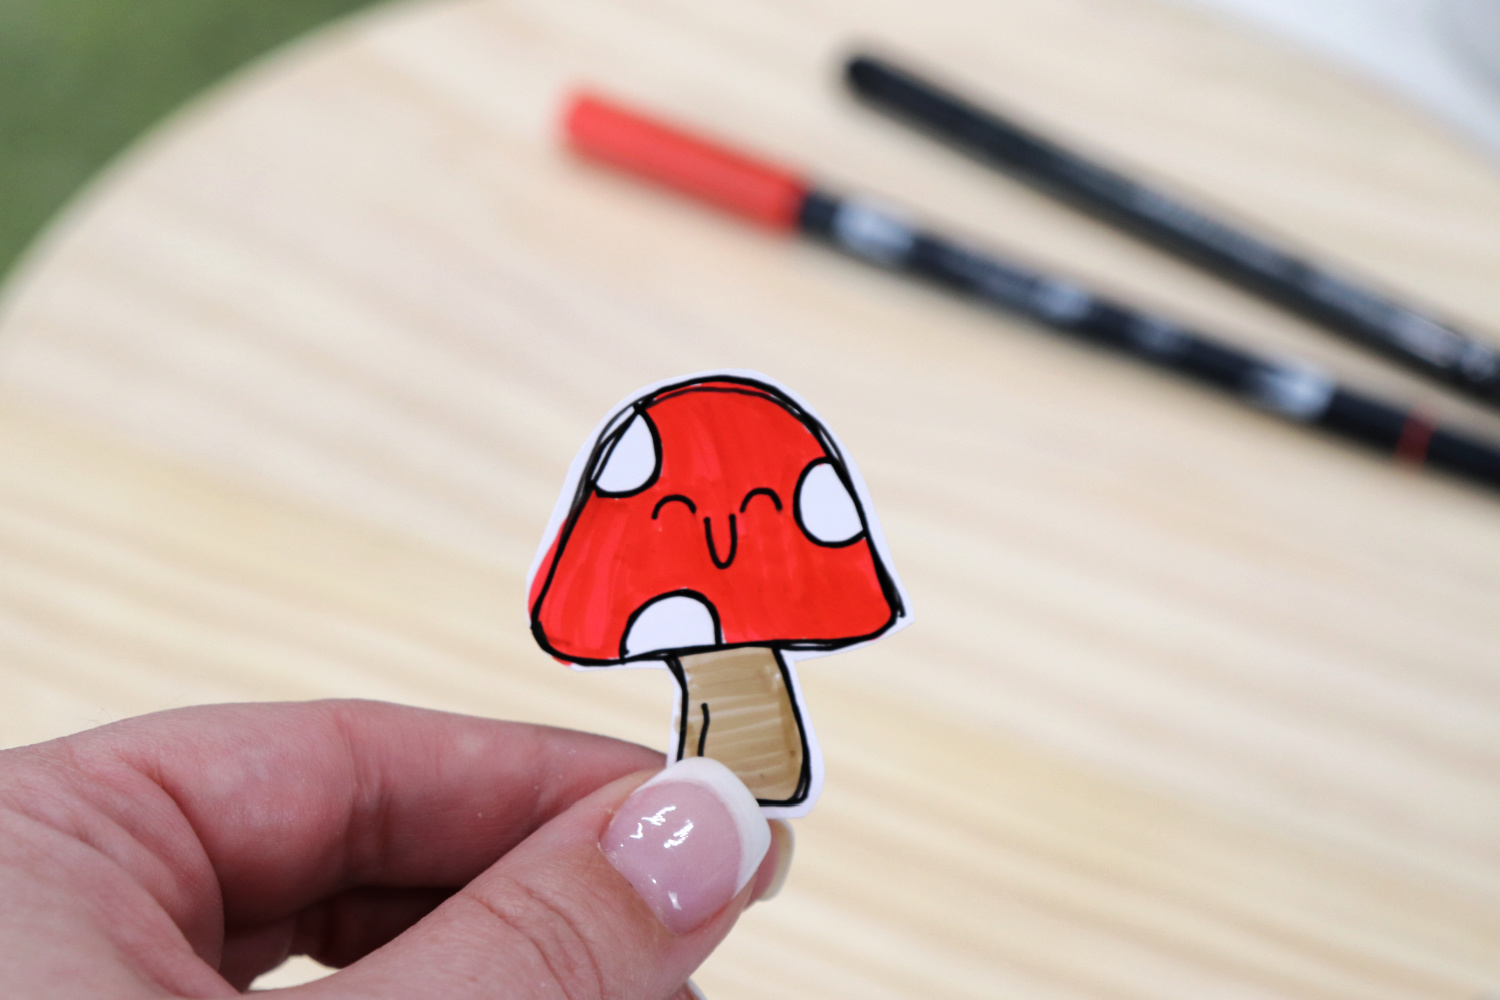 Image contains Amy’s hand holding a toadstool sticker cut from printable vinyl. In the background, two markers (red and black) sit on a wooden surface.